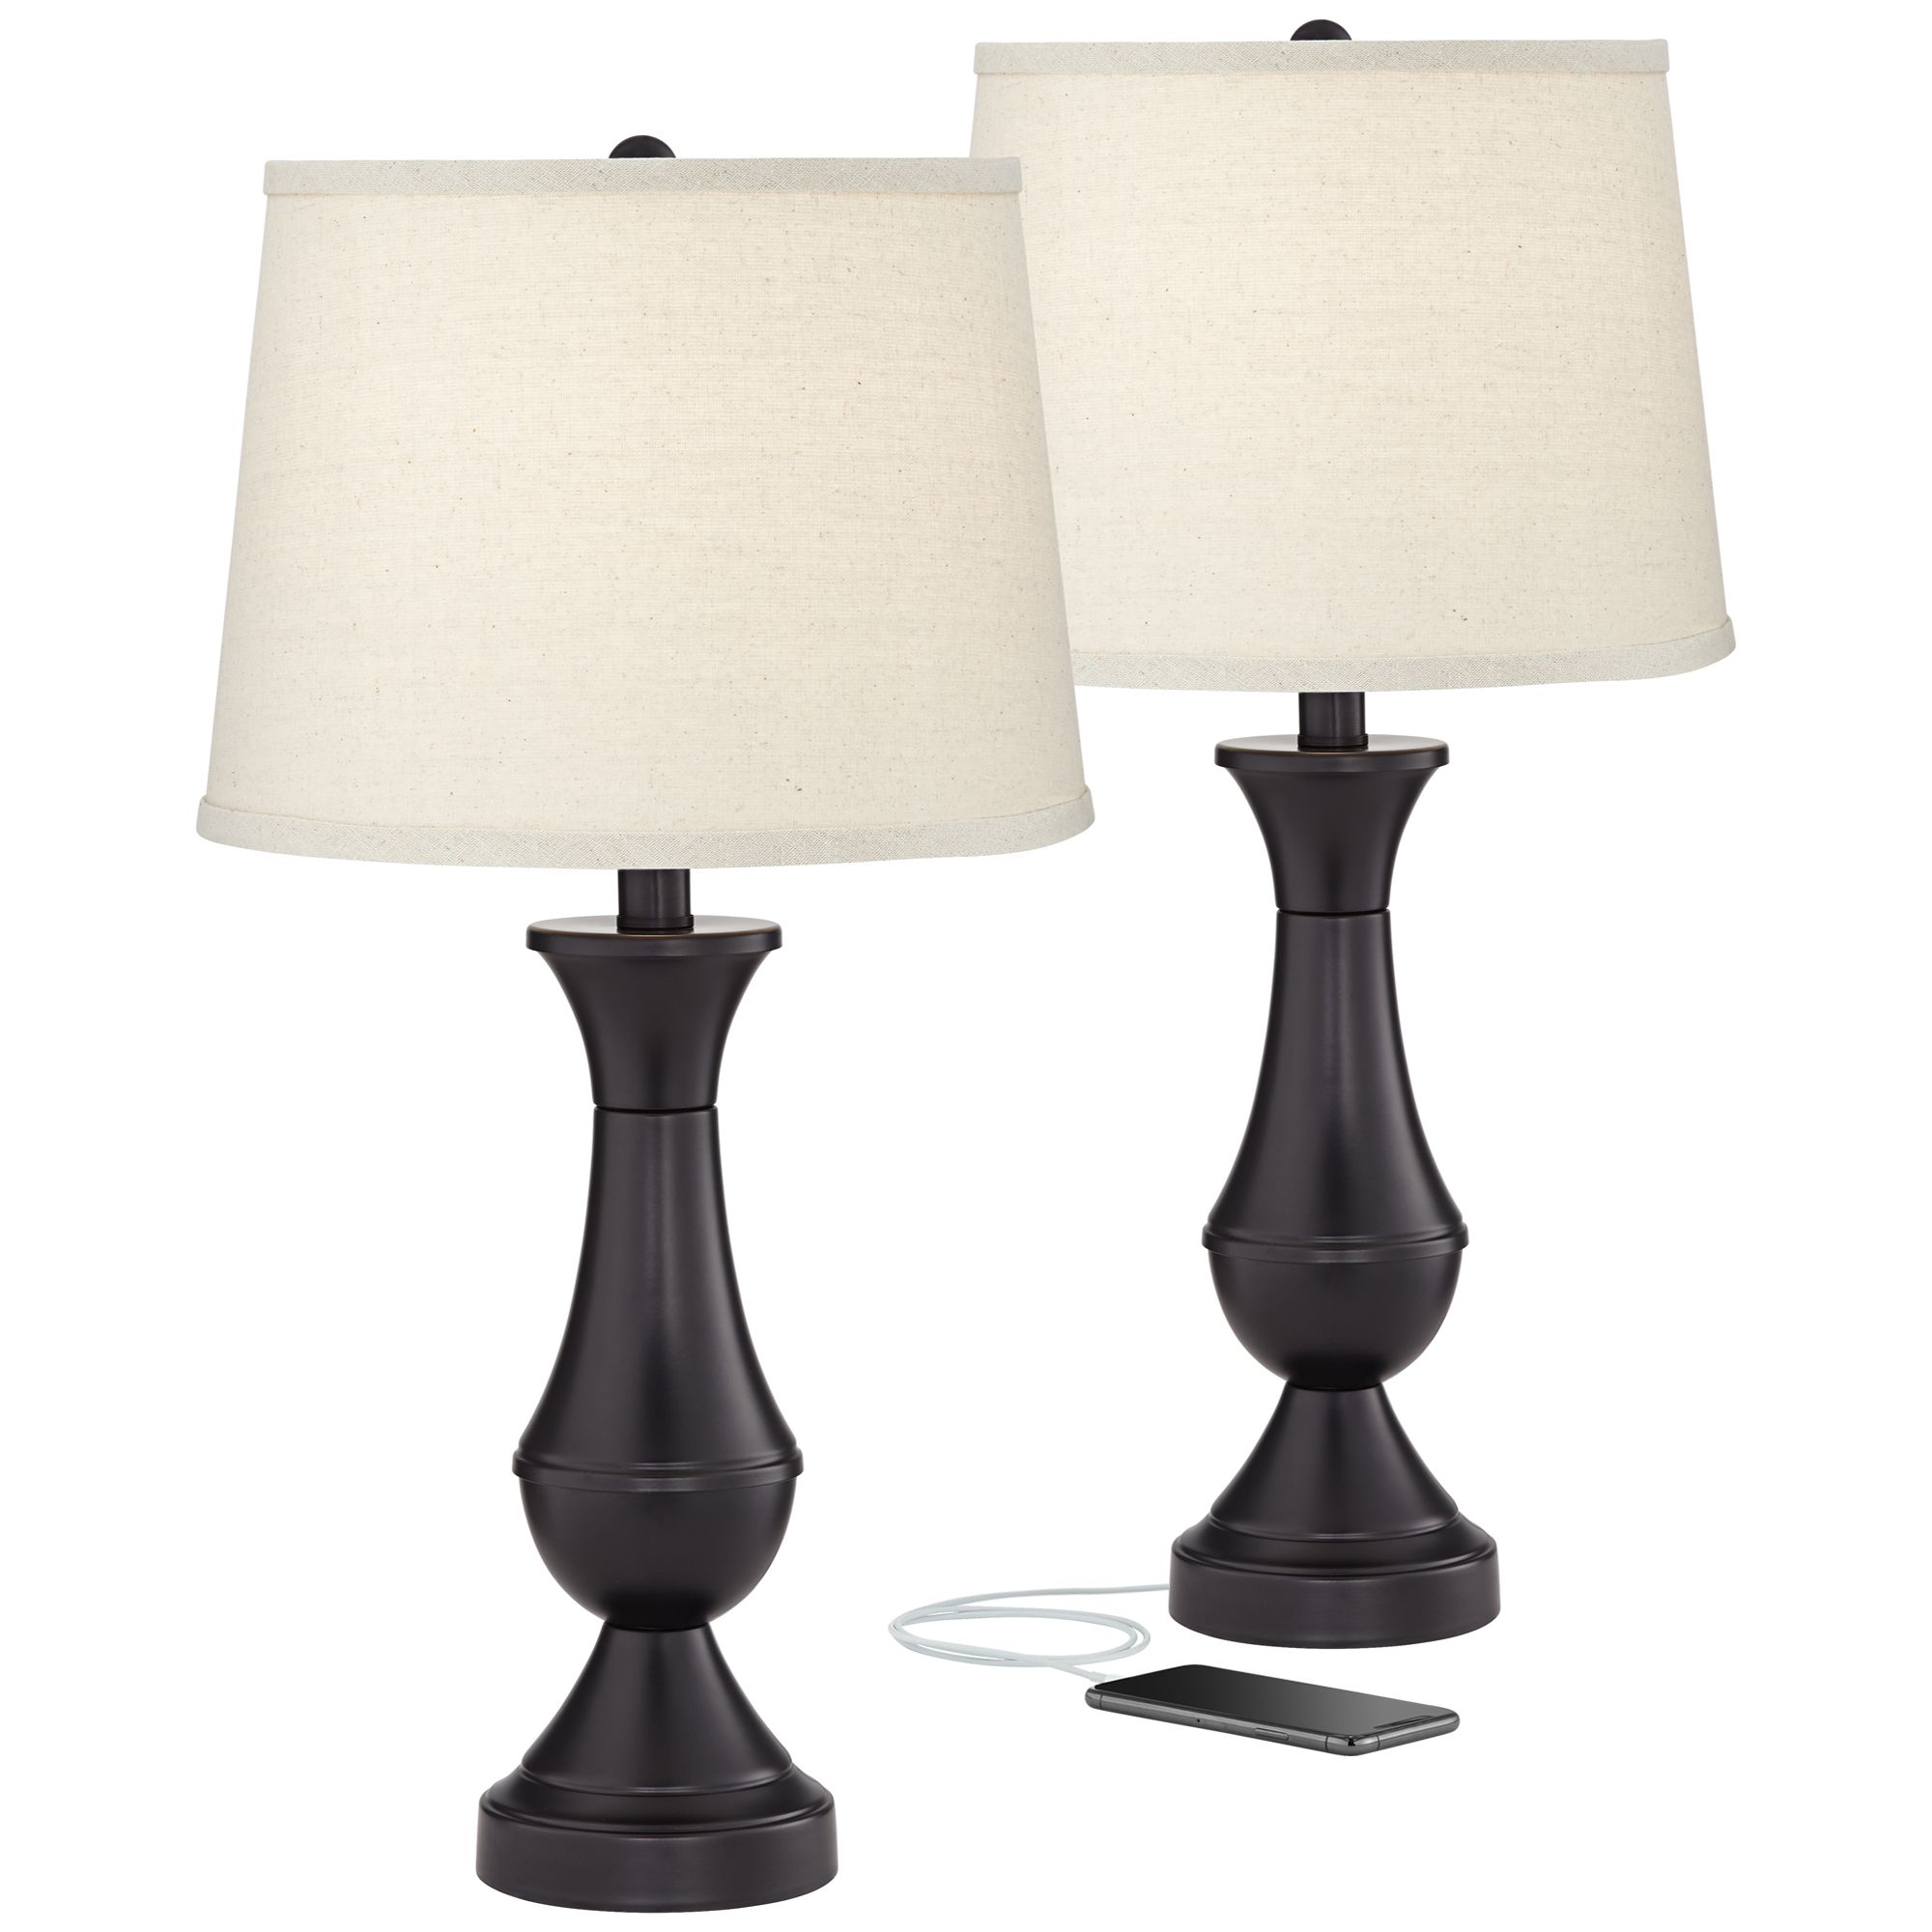 2 Touch Table Lamps with USB Ports 